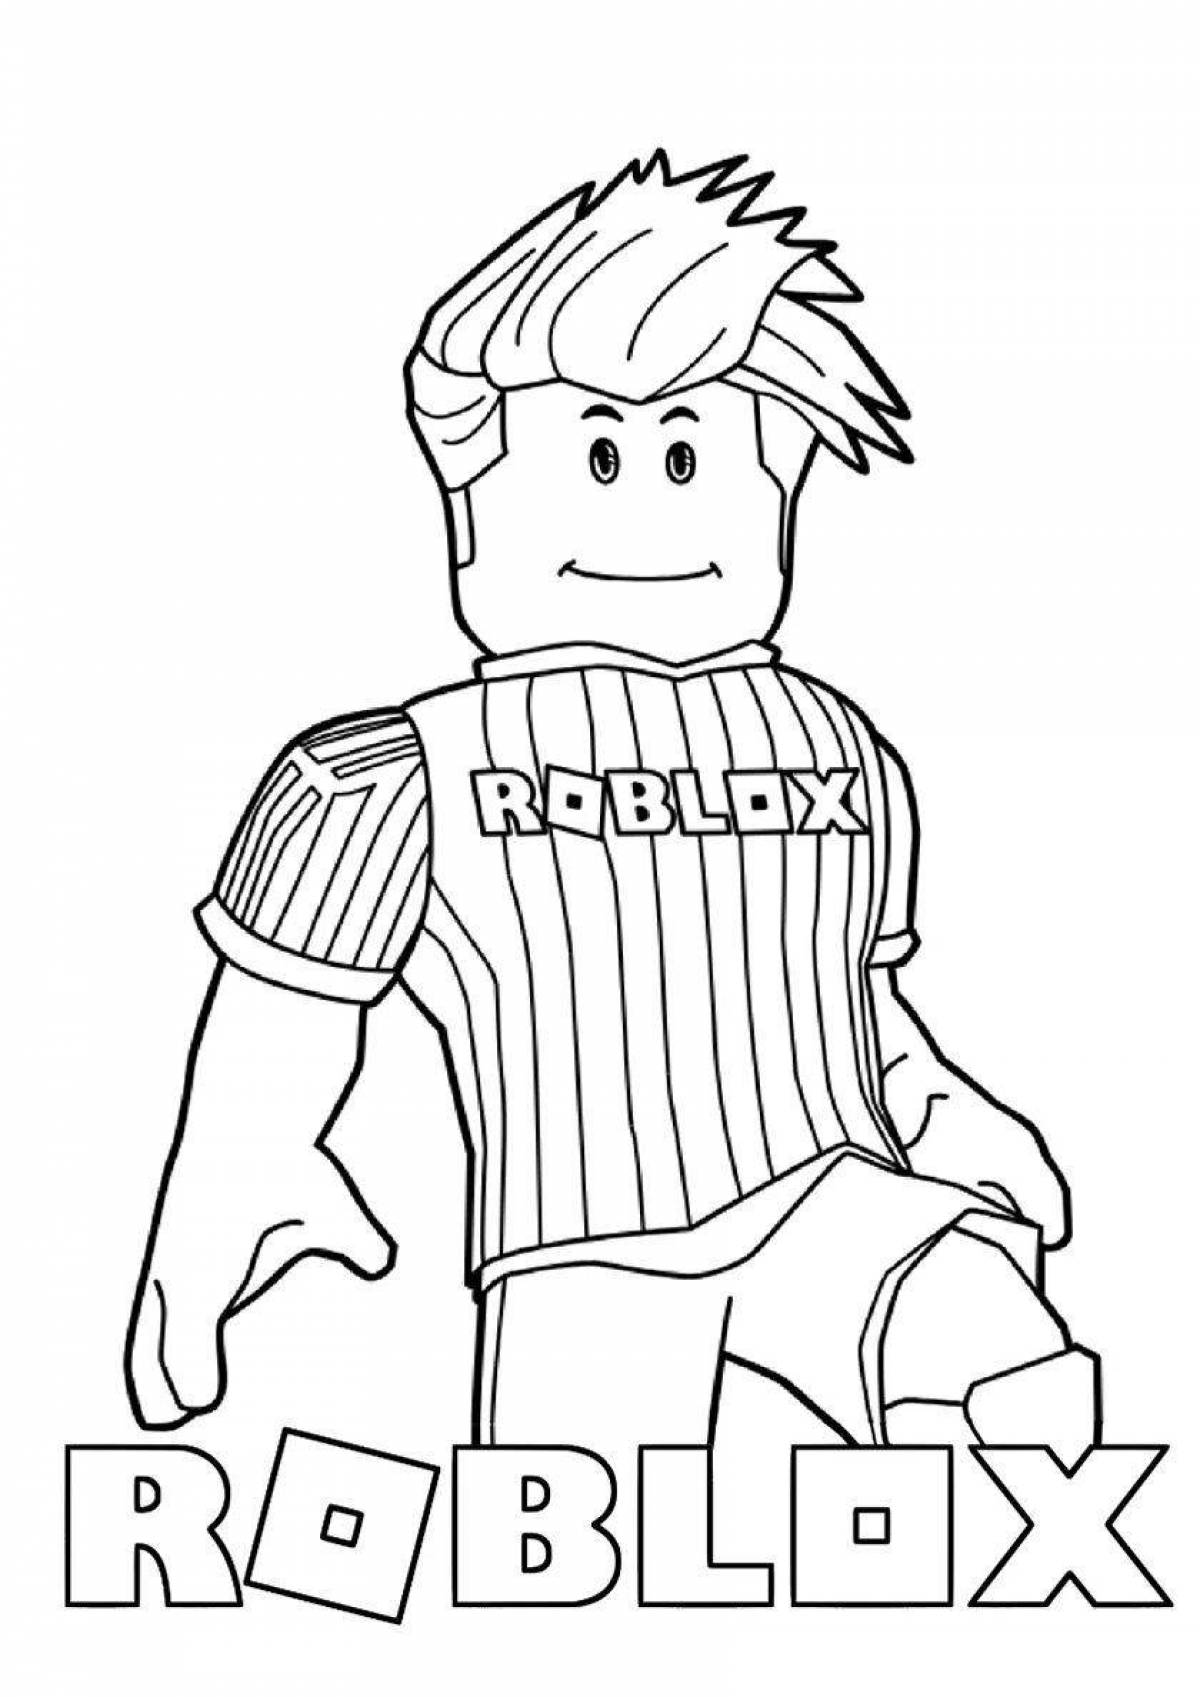 Roblox funny donator coloring page